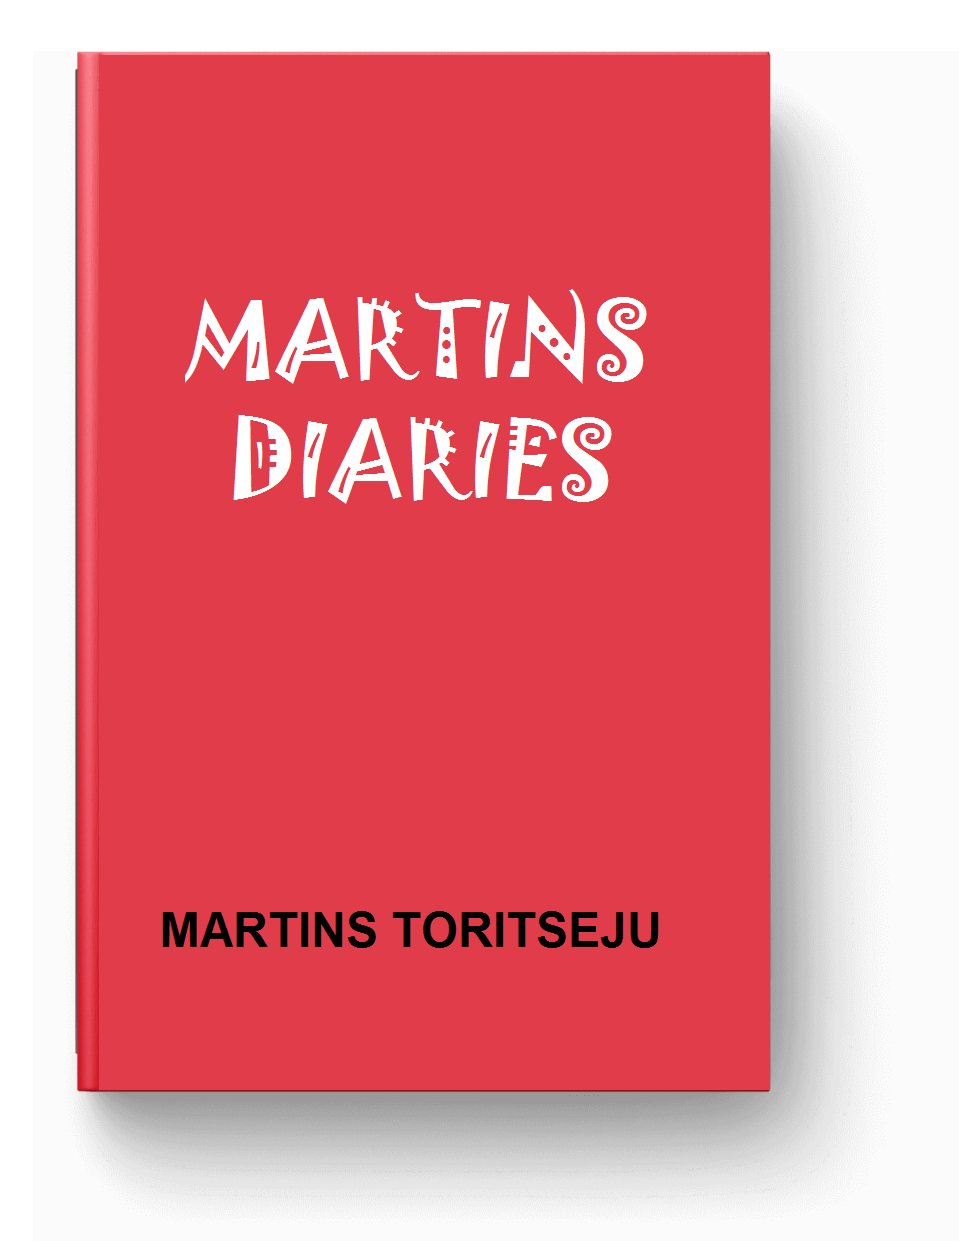 Buy Martins Diaries today